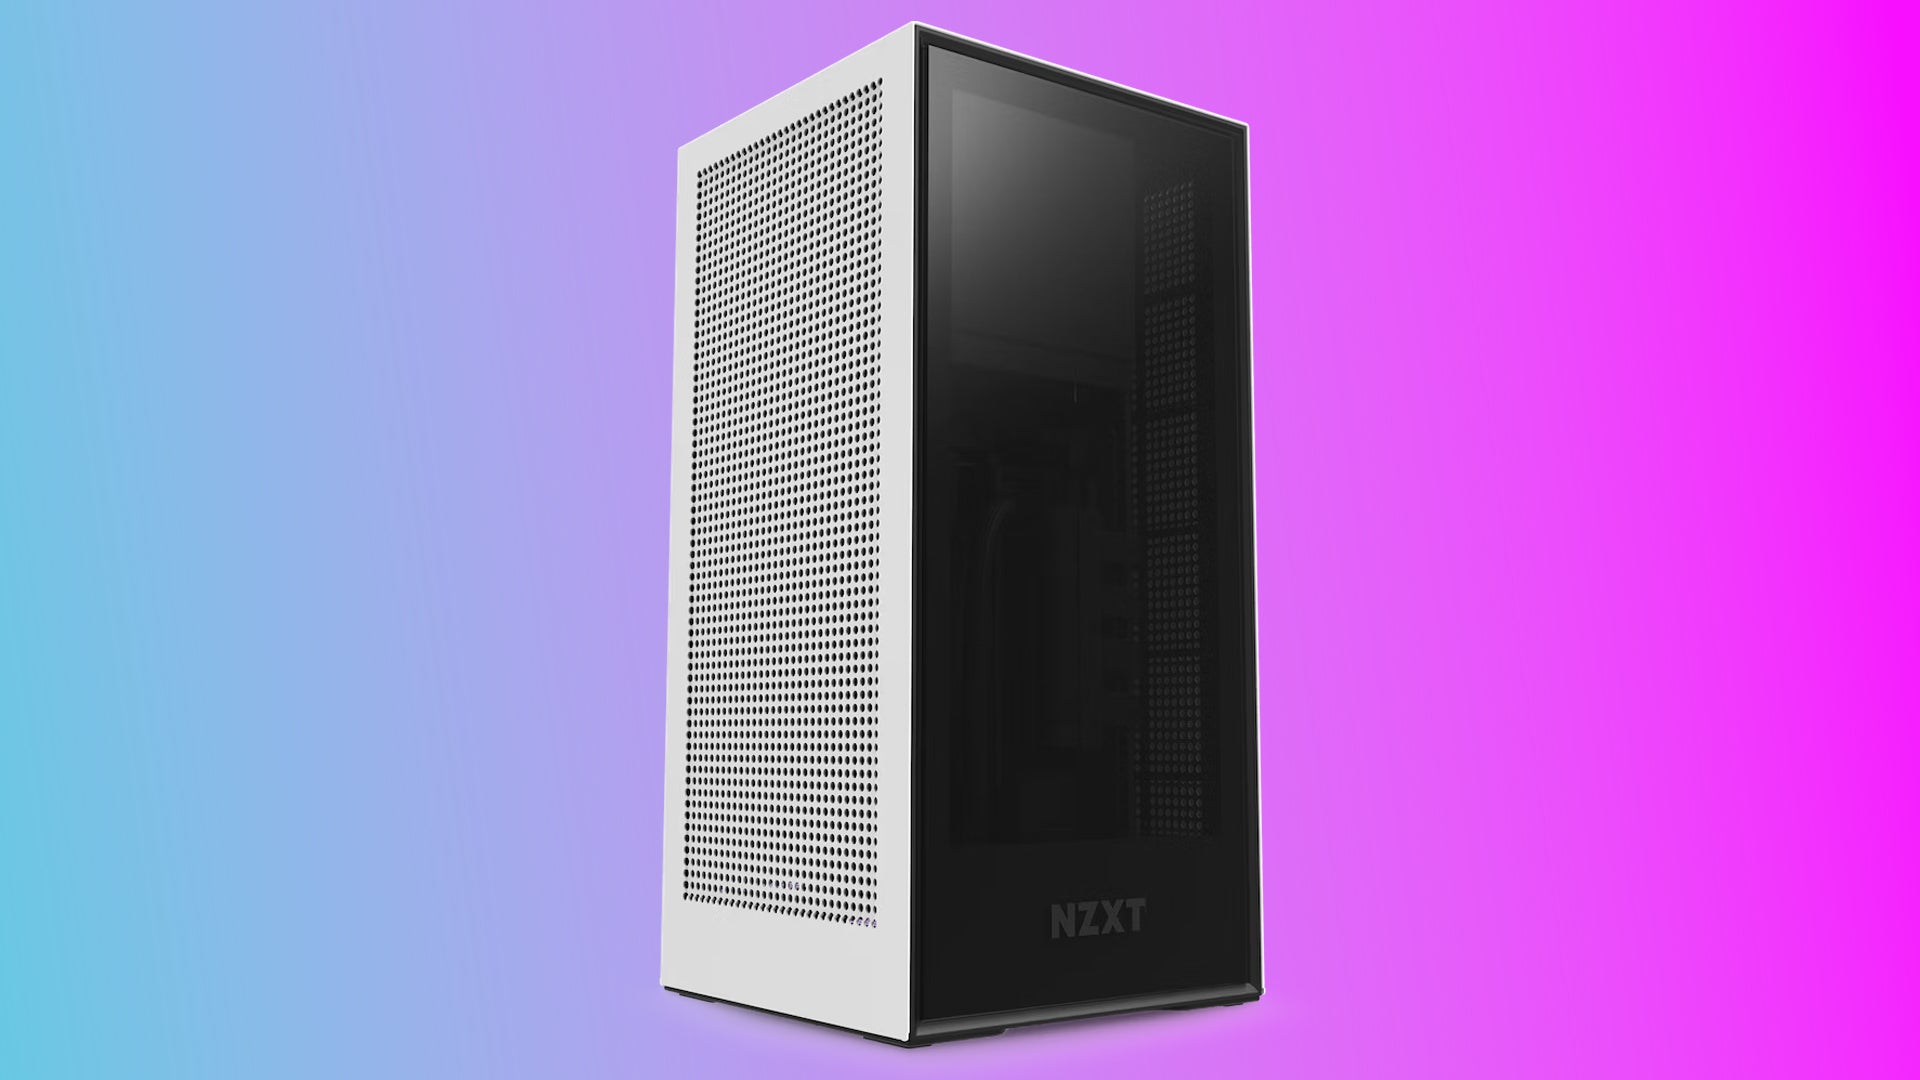 This fetching NZXT H1 V2 small form factor PC case is down to £200 